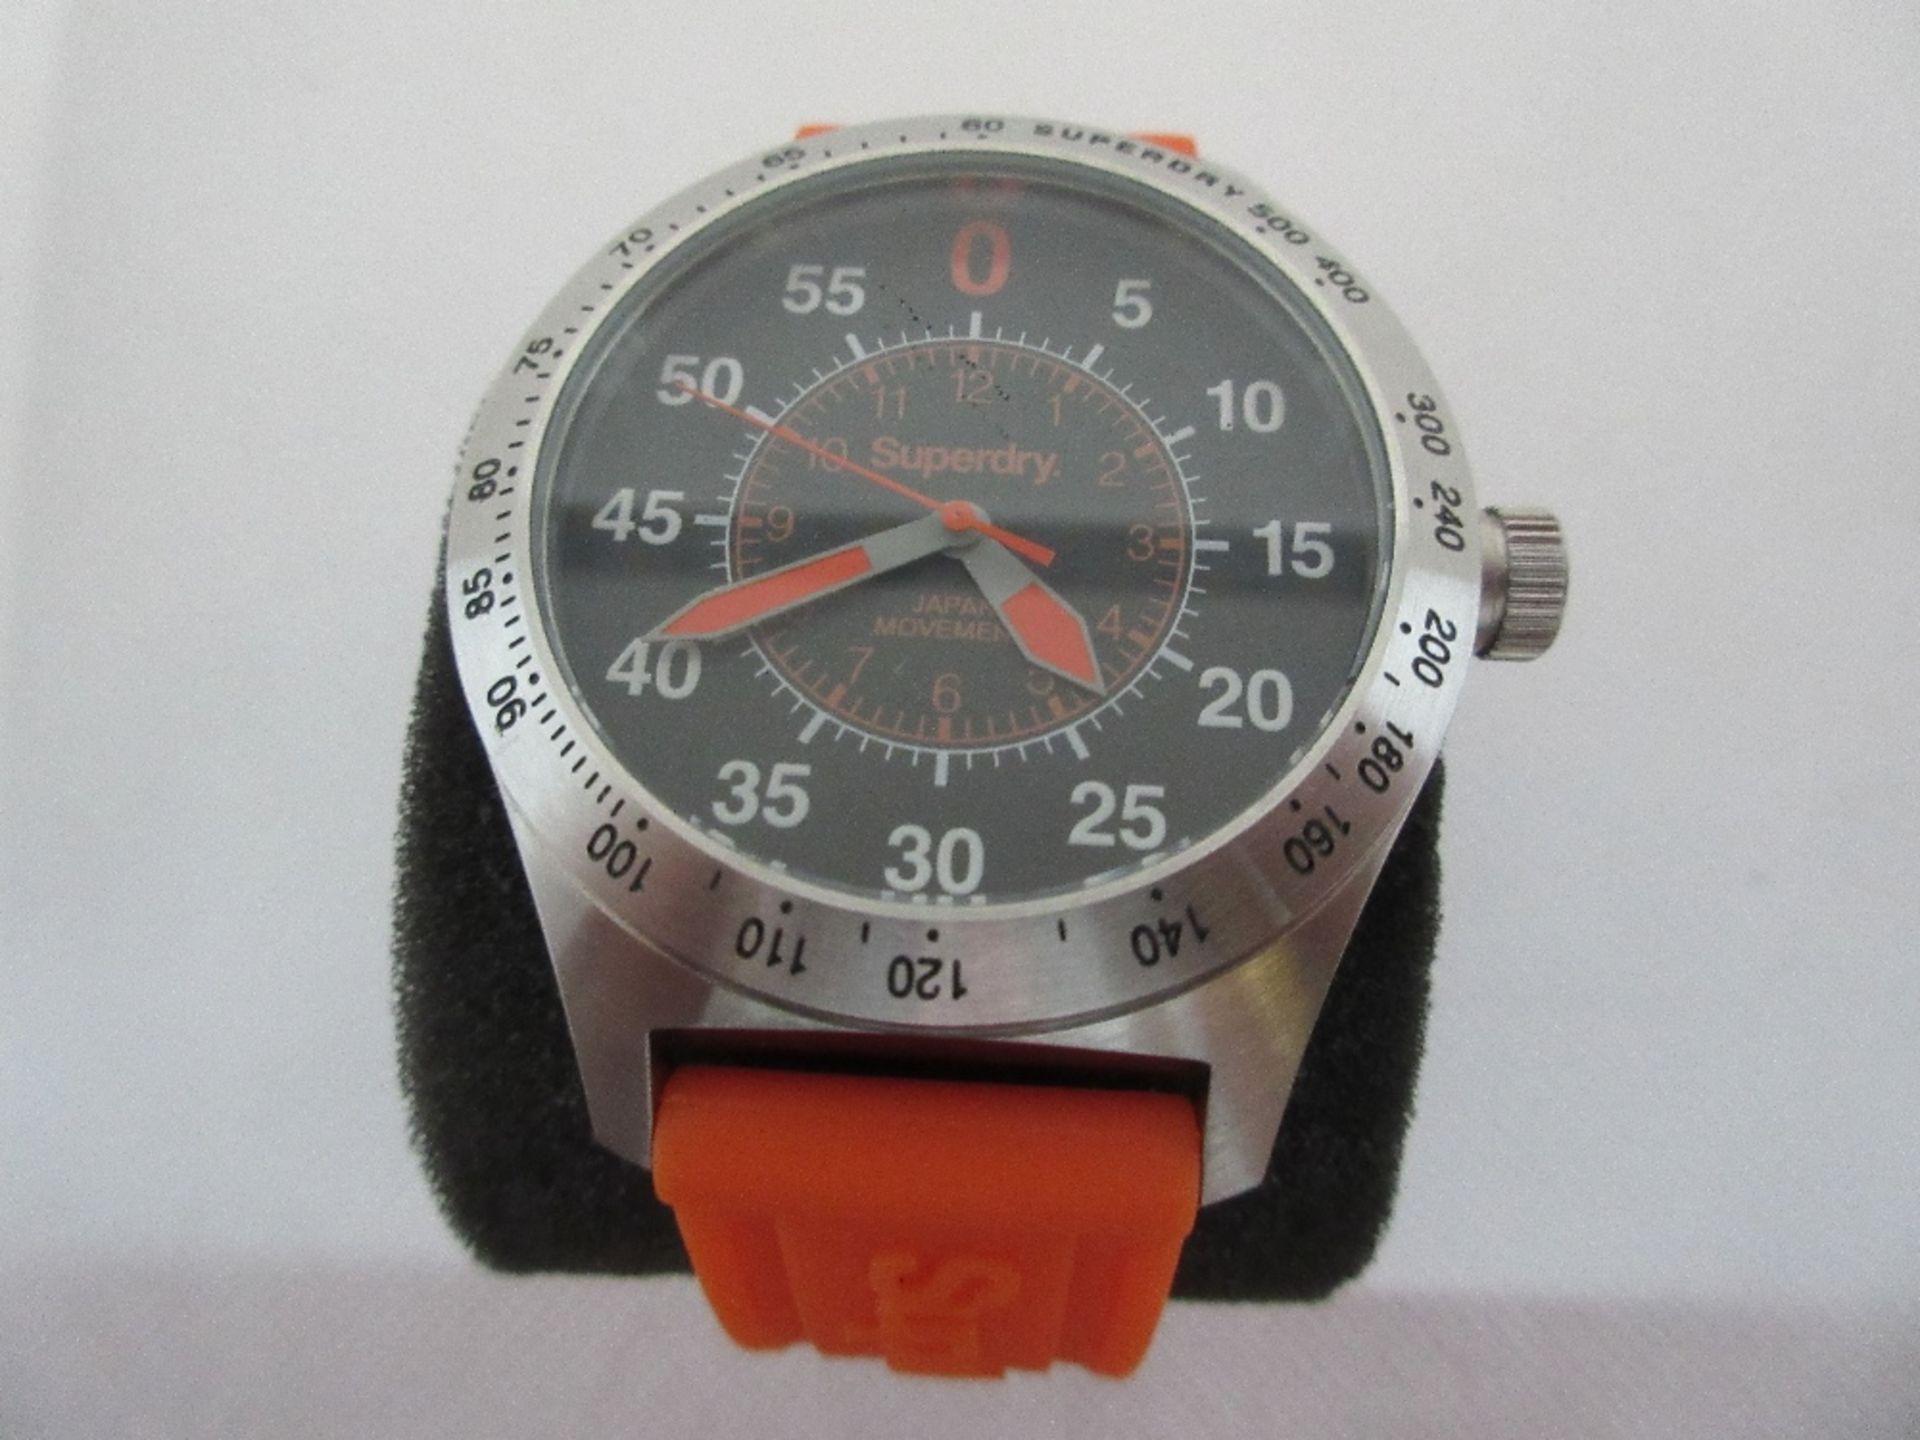 SUPERDRY MALE WATCH, MODEL SYG111O, CASE DIAMETER 45MM, RUBBER STRAP, BOXED, RRP £ 80 - Image 2 of 4